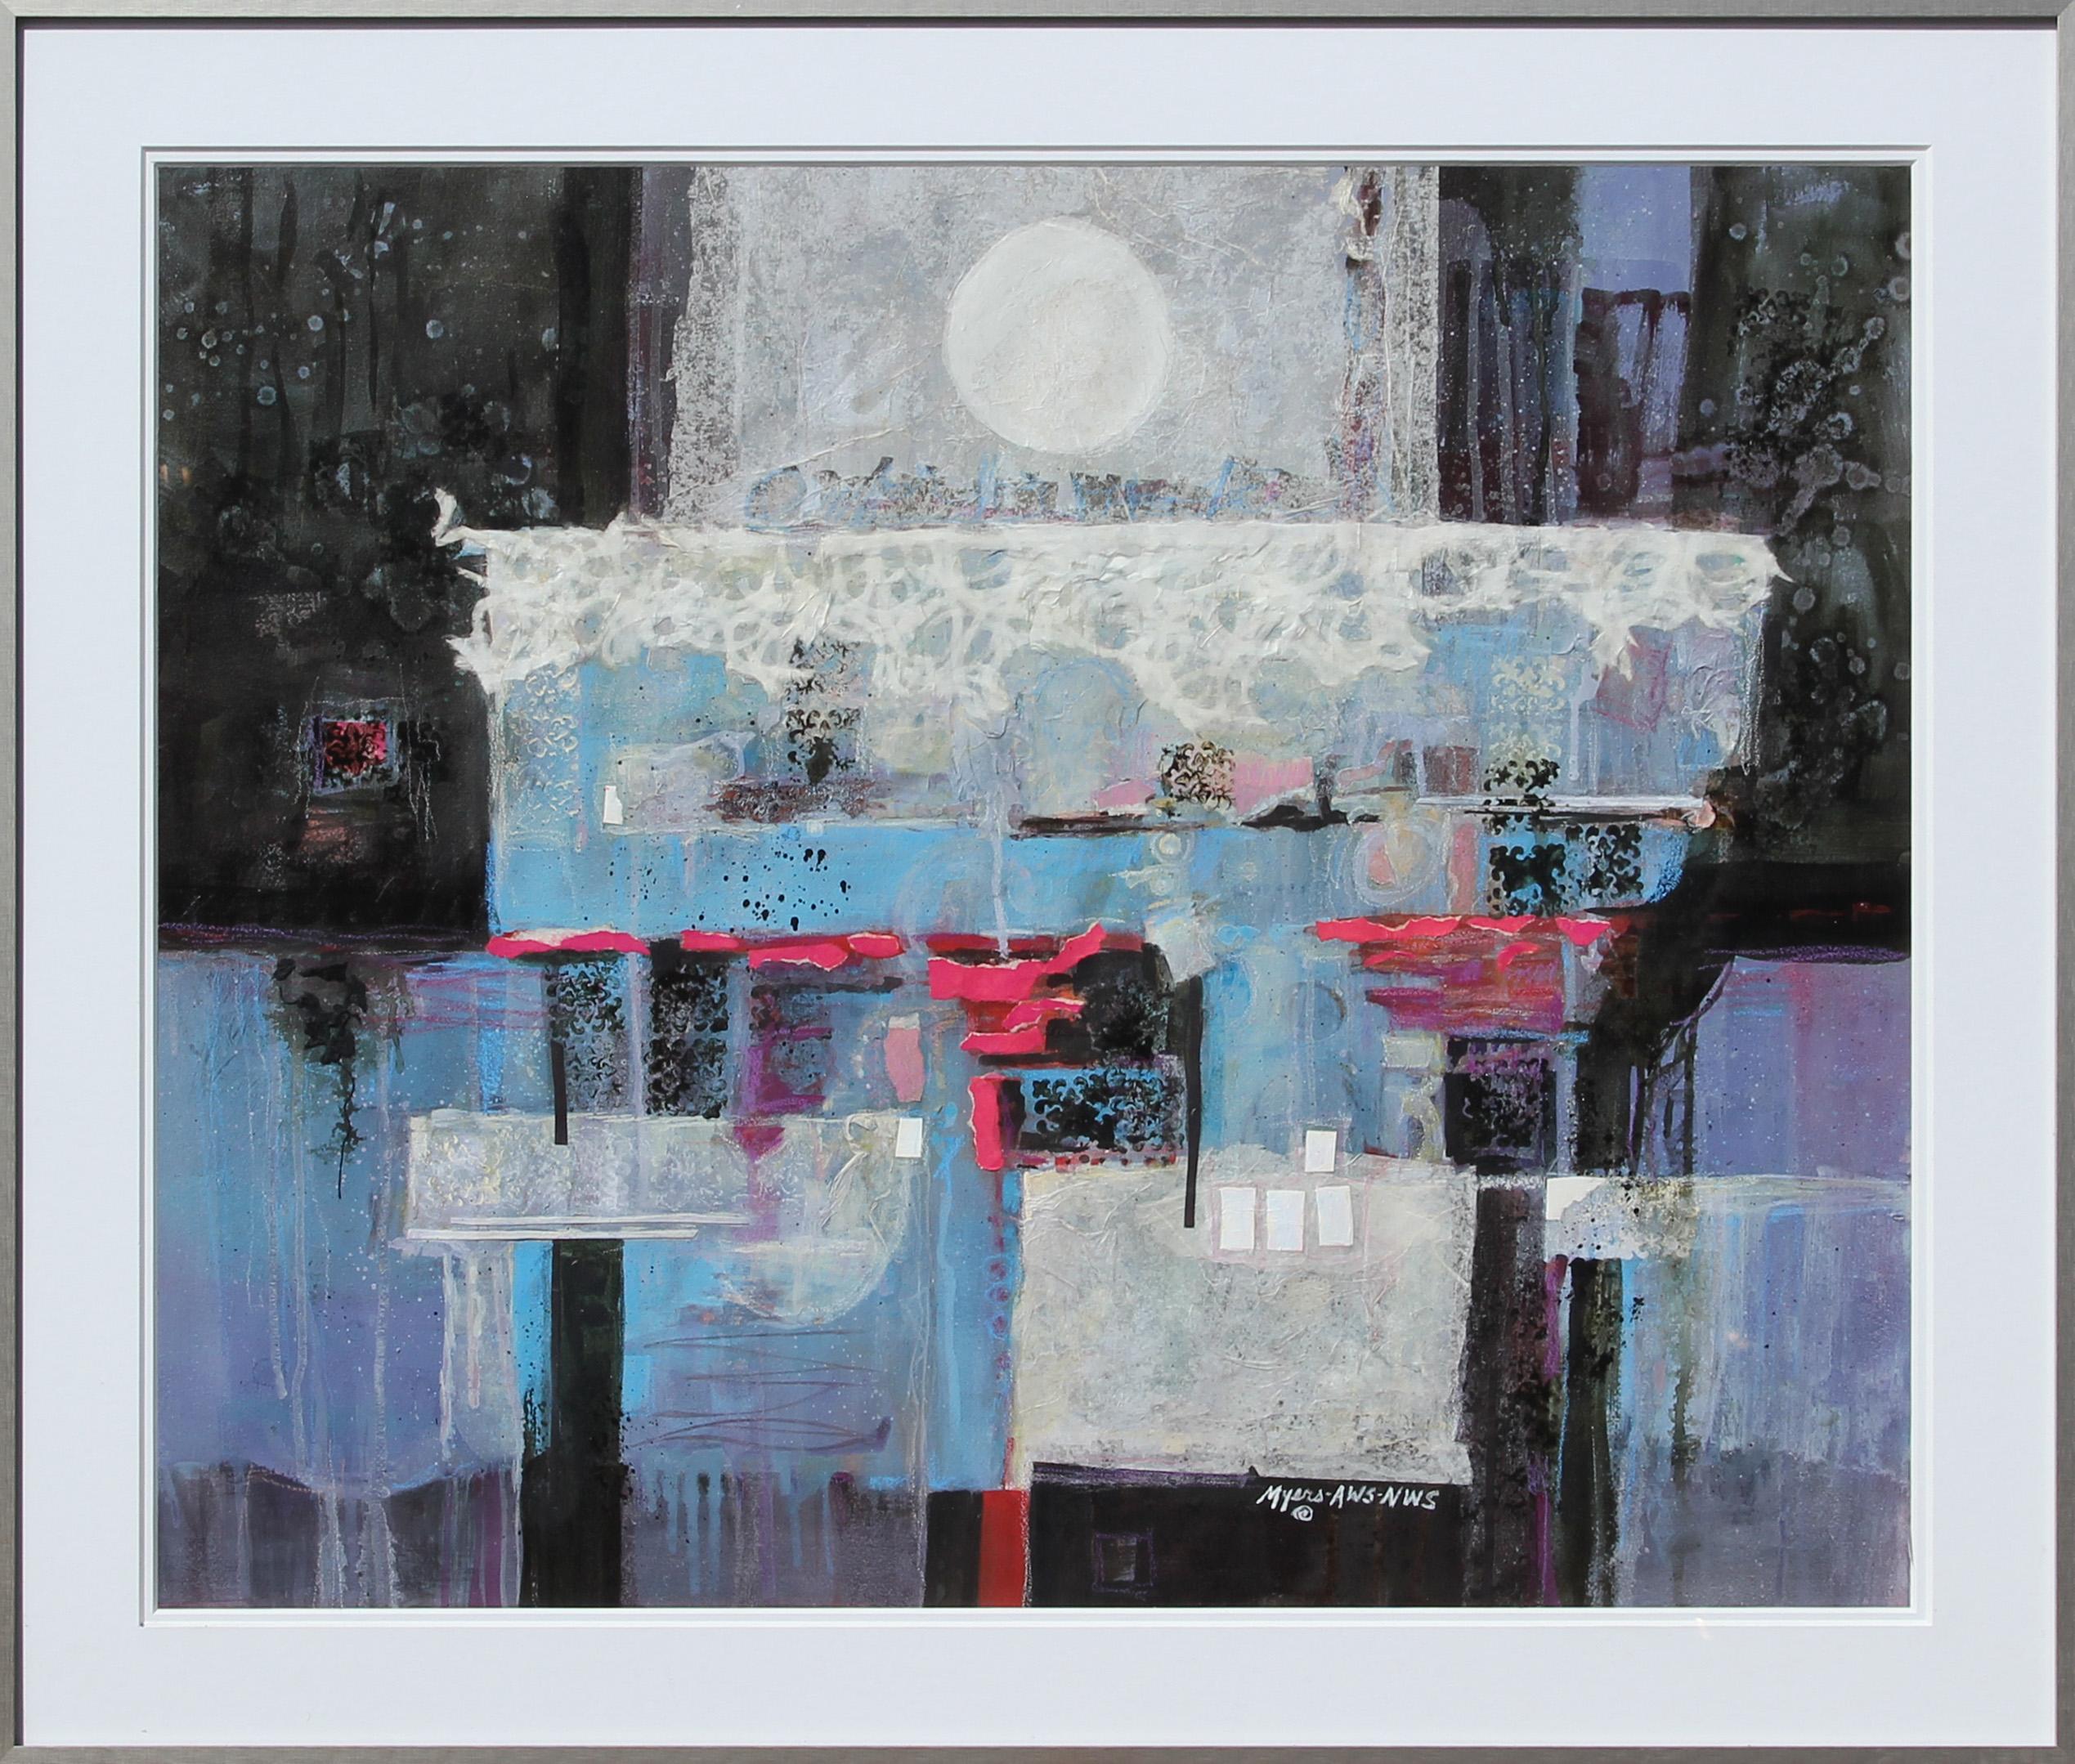 "The Moon was Full that Night" Modern Abstract Night Landscape Painting - Mixed Media Art by Carole Myers